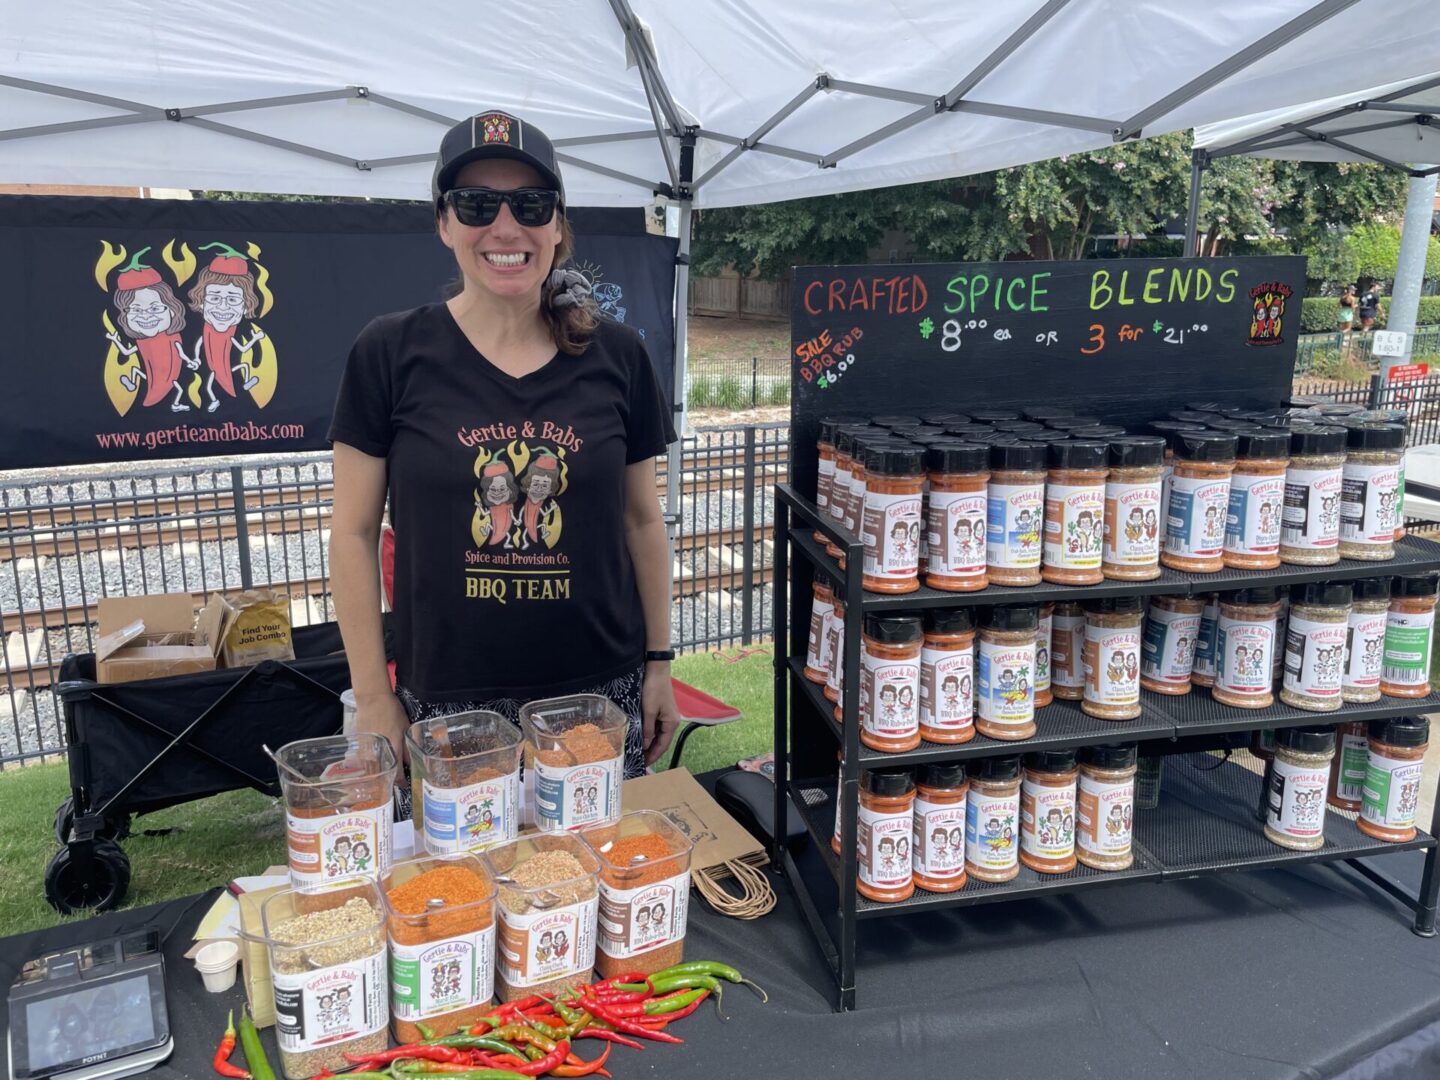 A woman selling crafted spice blends